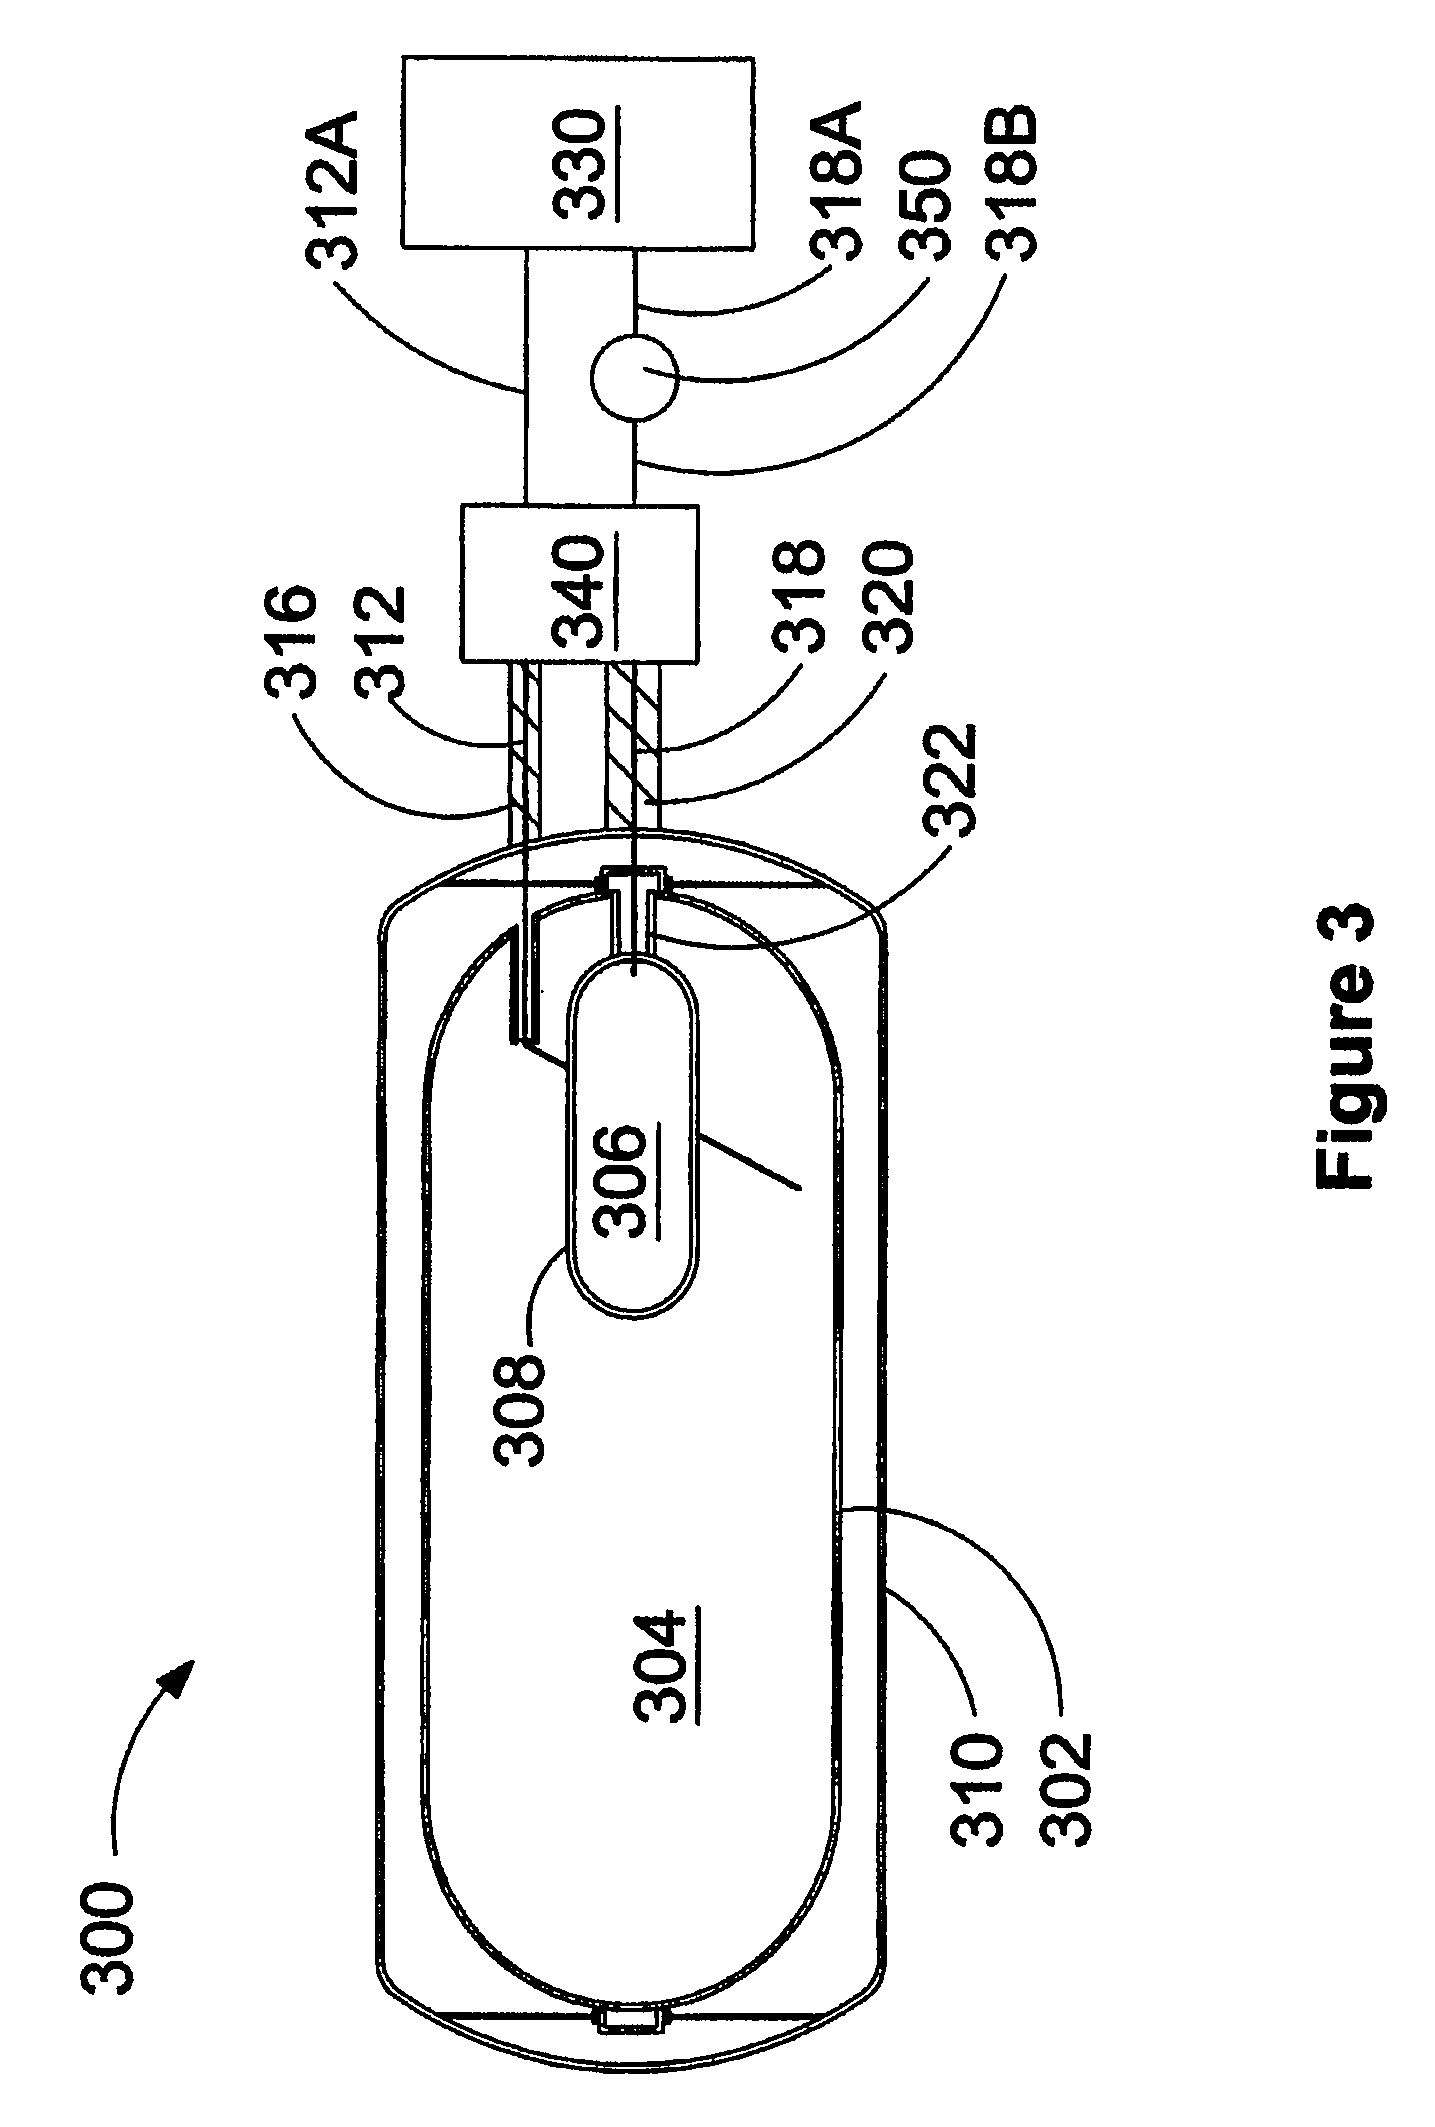 Multi-fuel storage system and method of storing fuel in a multi-fuel storage system